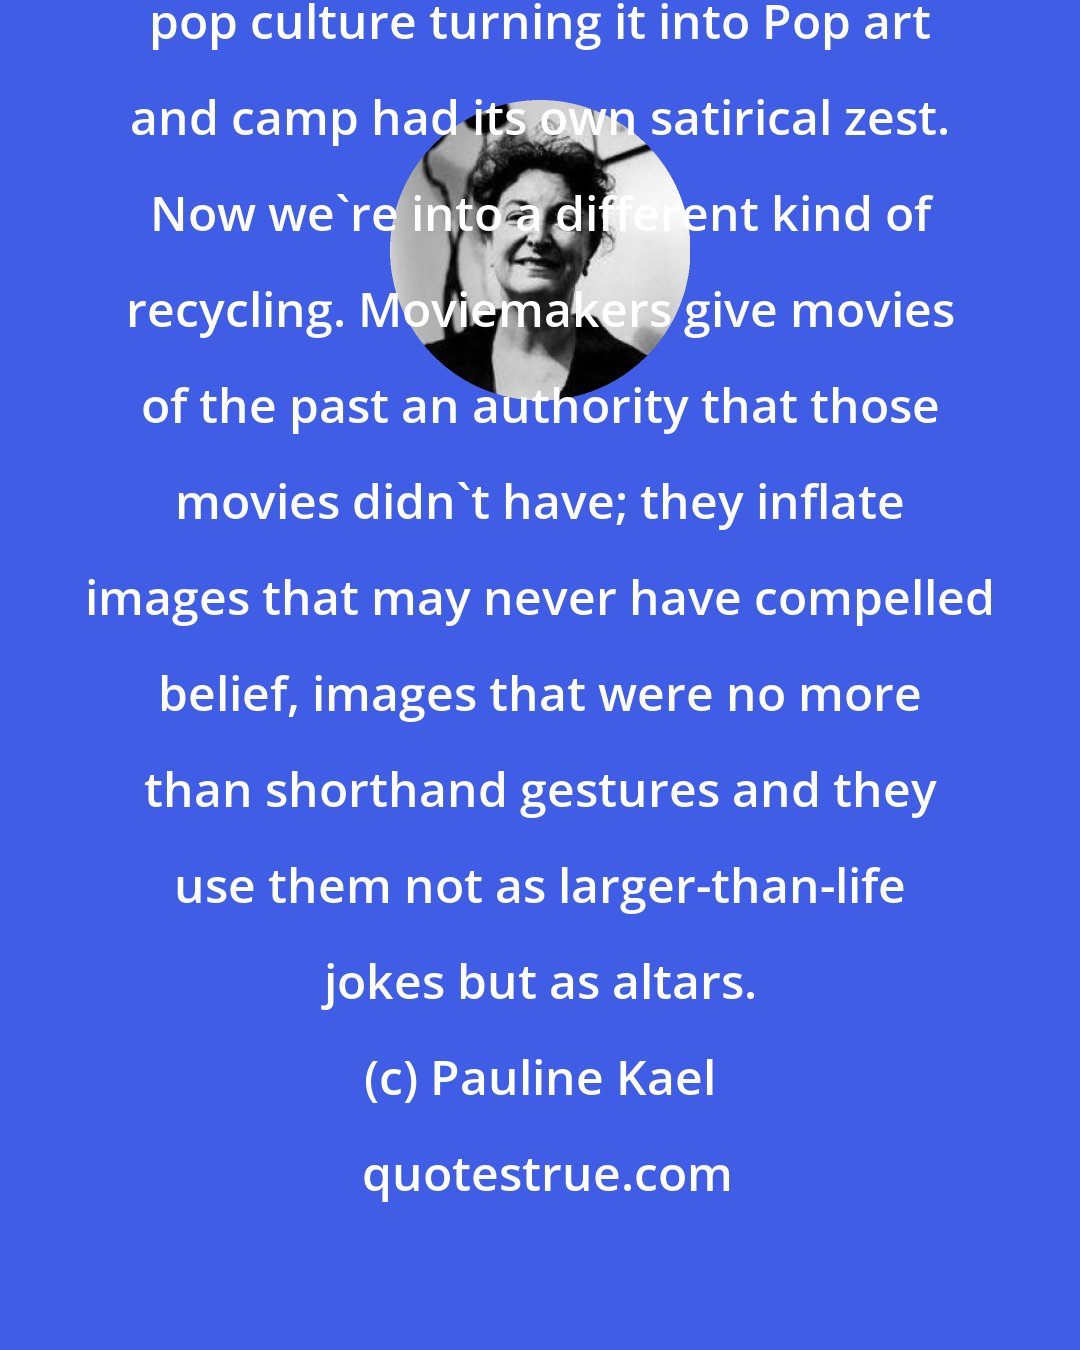 Pauline Kael: In the sixties, the recycling of pop culture turning it into Pop art and camp had its own satirical zest. Now we're into a different kind of recycling. Moviemakers give movies of the past an authority that those movies didn't have; they inflate images that may never have compelled belief, images that were no more than shorthand gestures and they use them not as larger-than-life jokes but as altars.